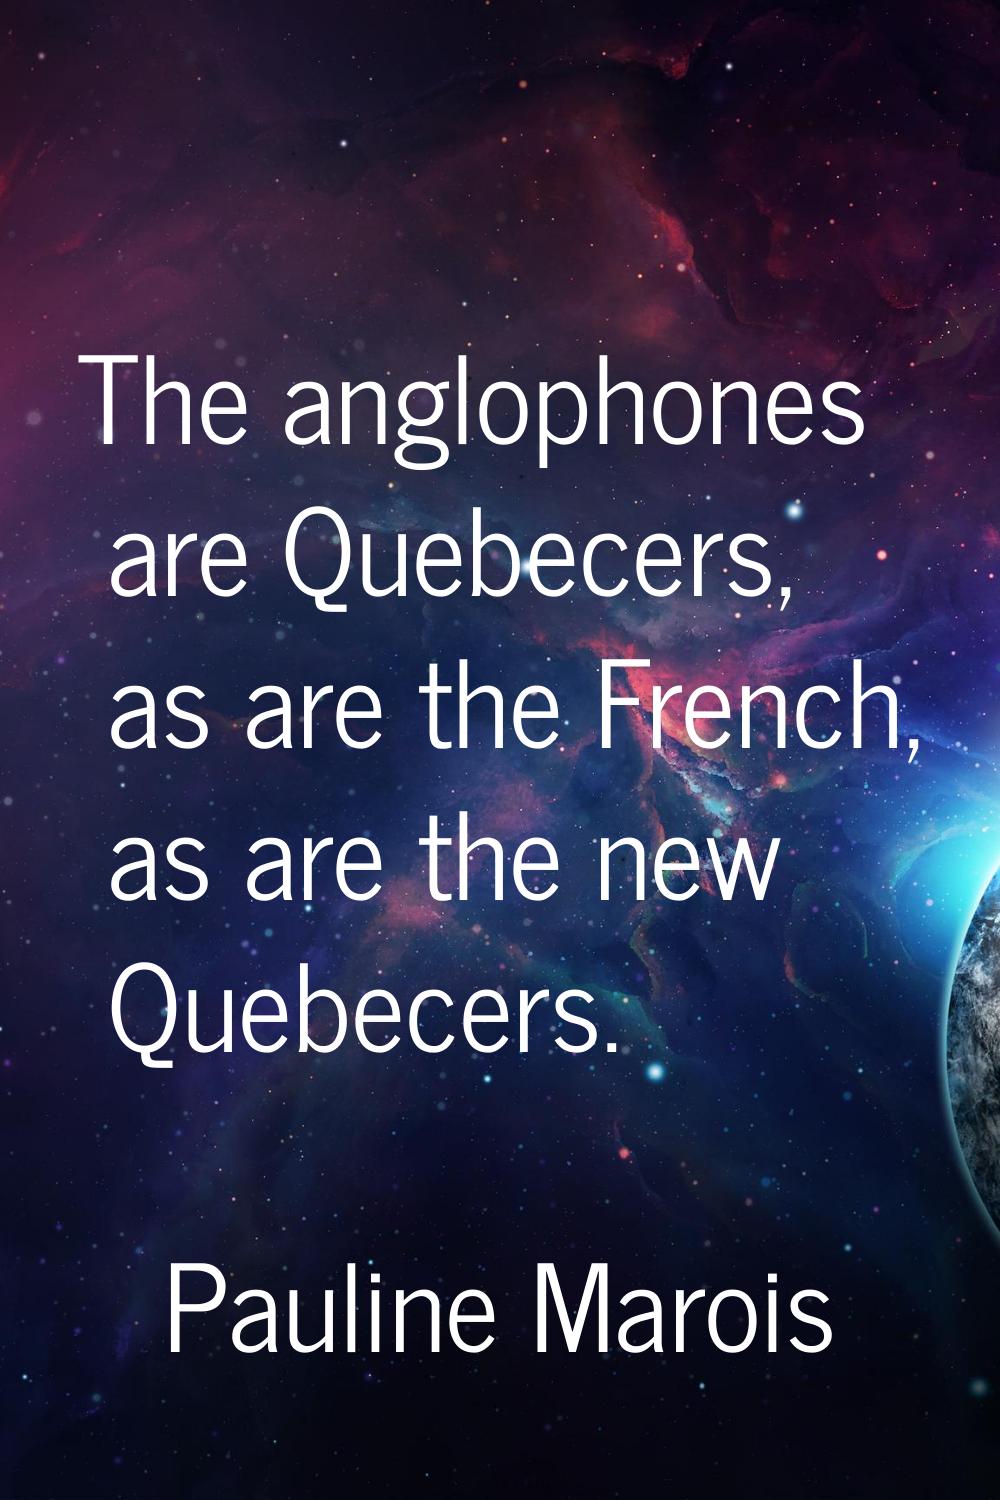 The anglophones are Quebecers, as are the French, as are the new Quebecers.